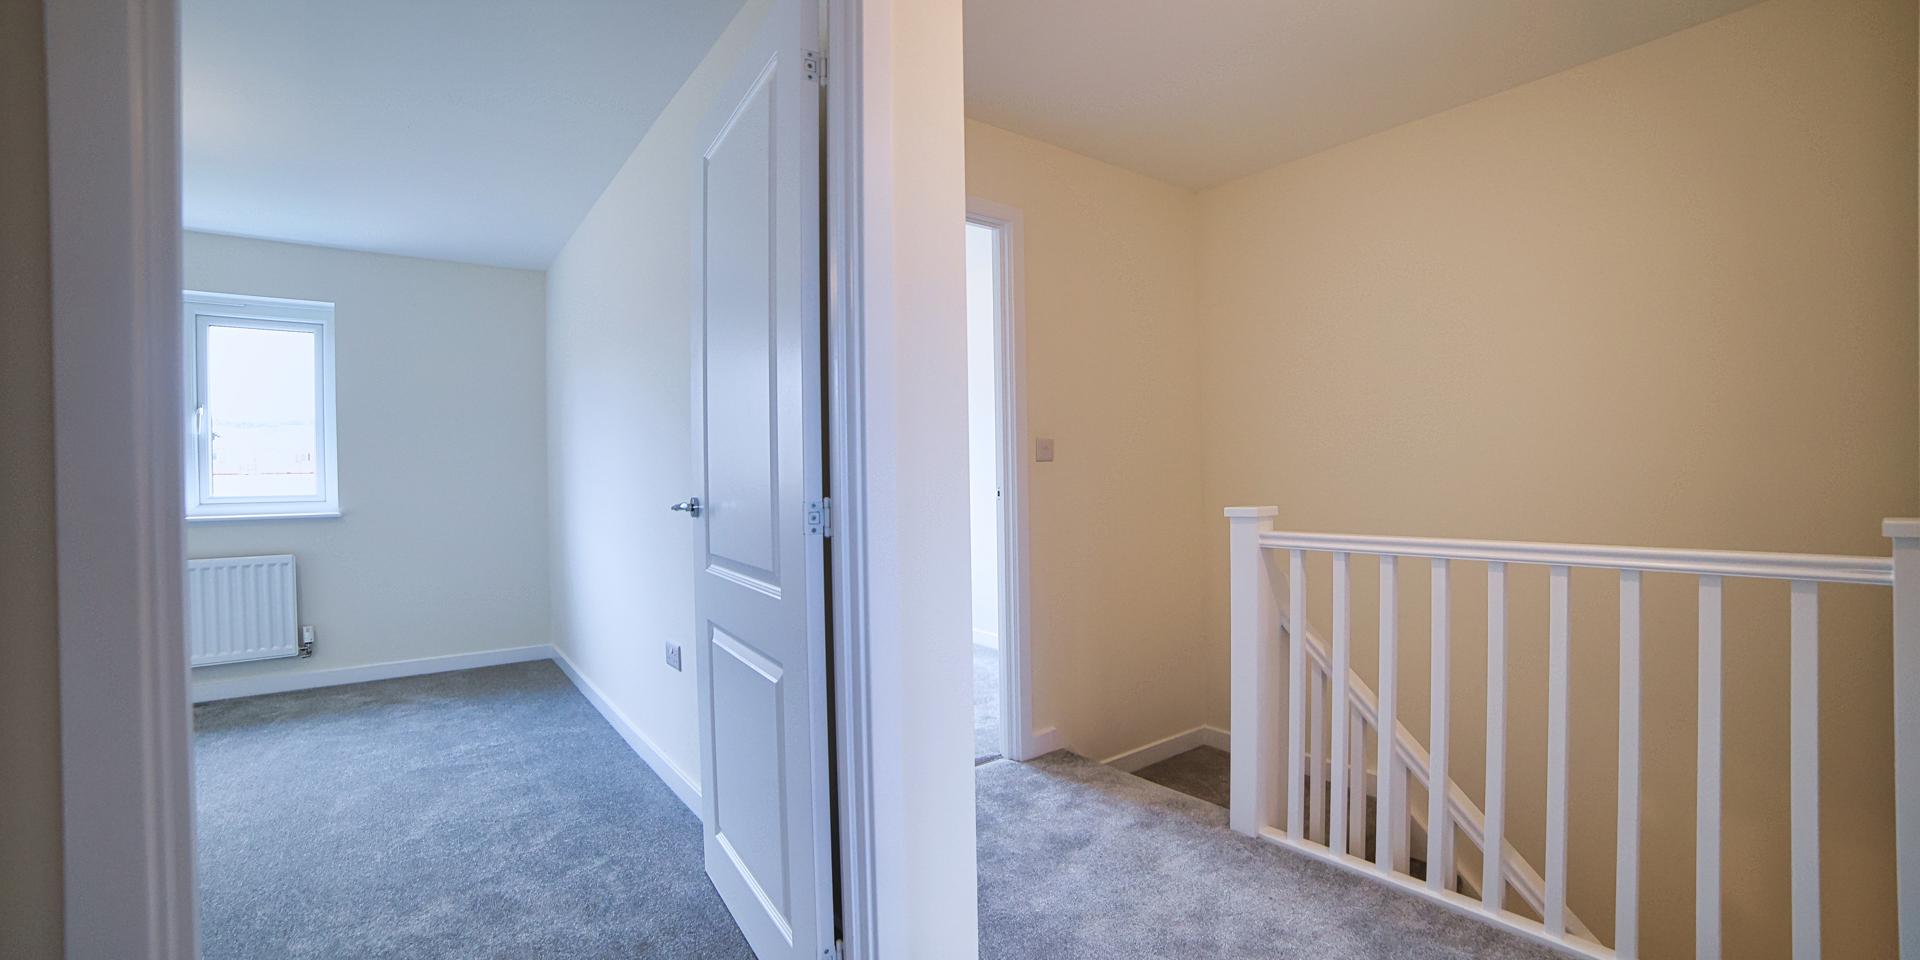 A view from the top of the landing looking into one of the double bedrooms